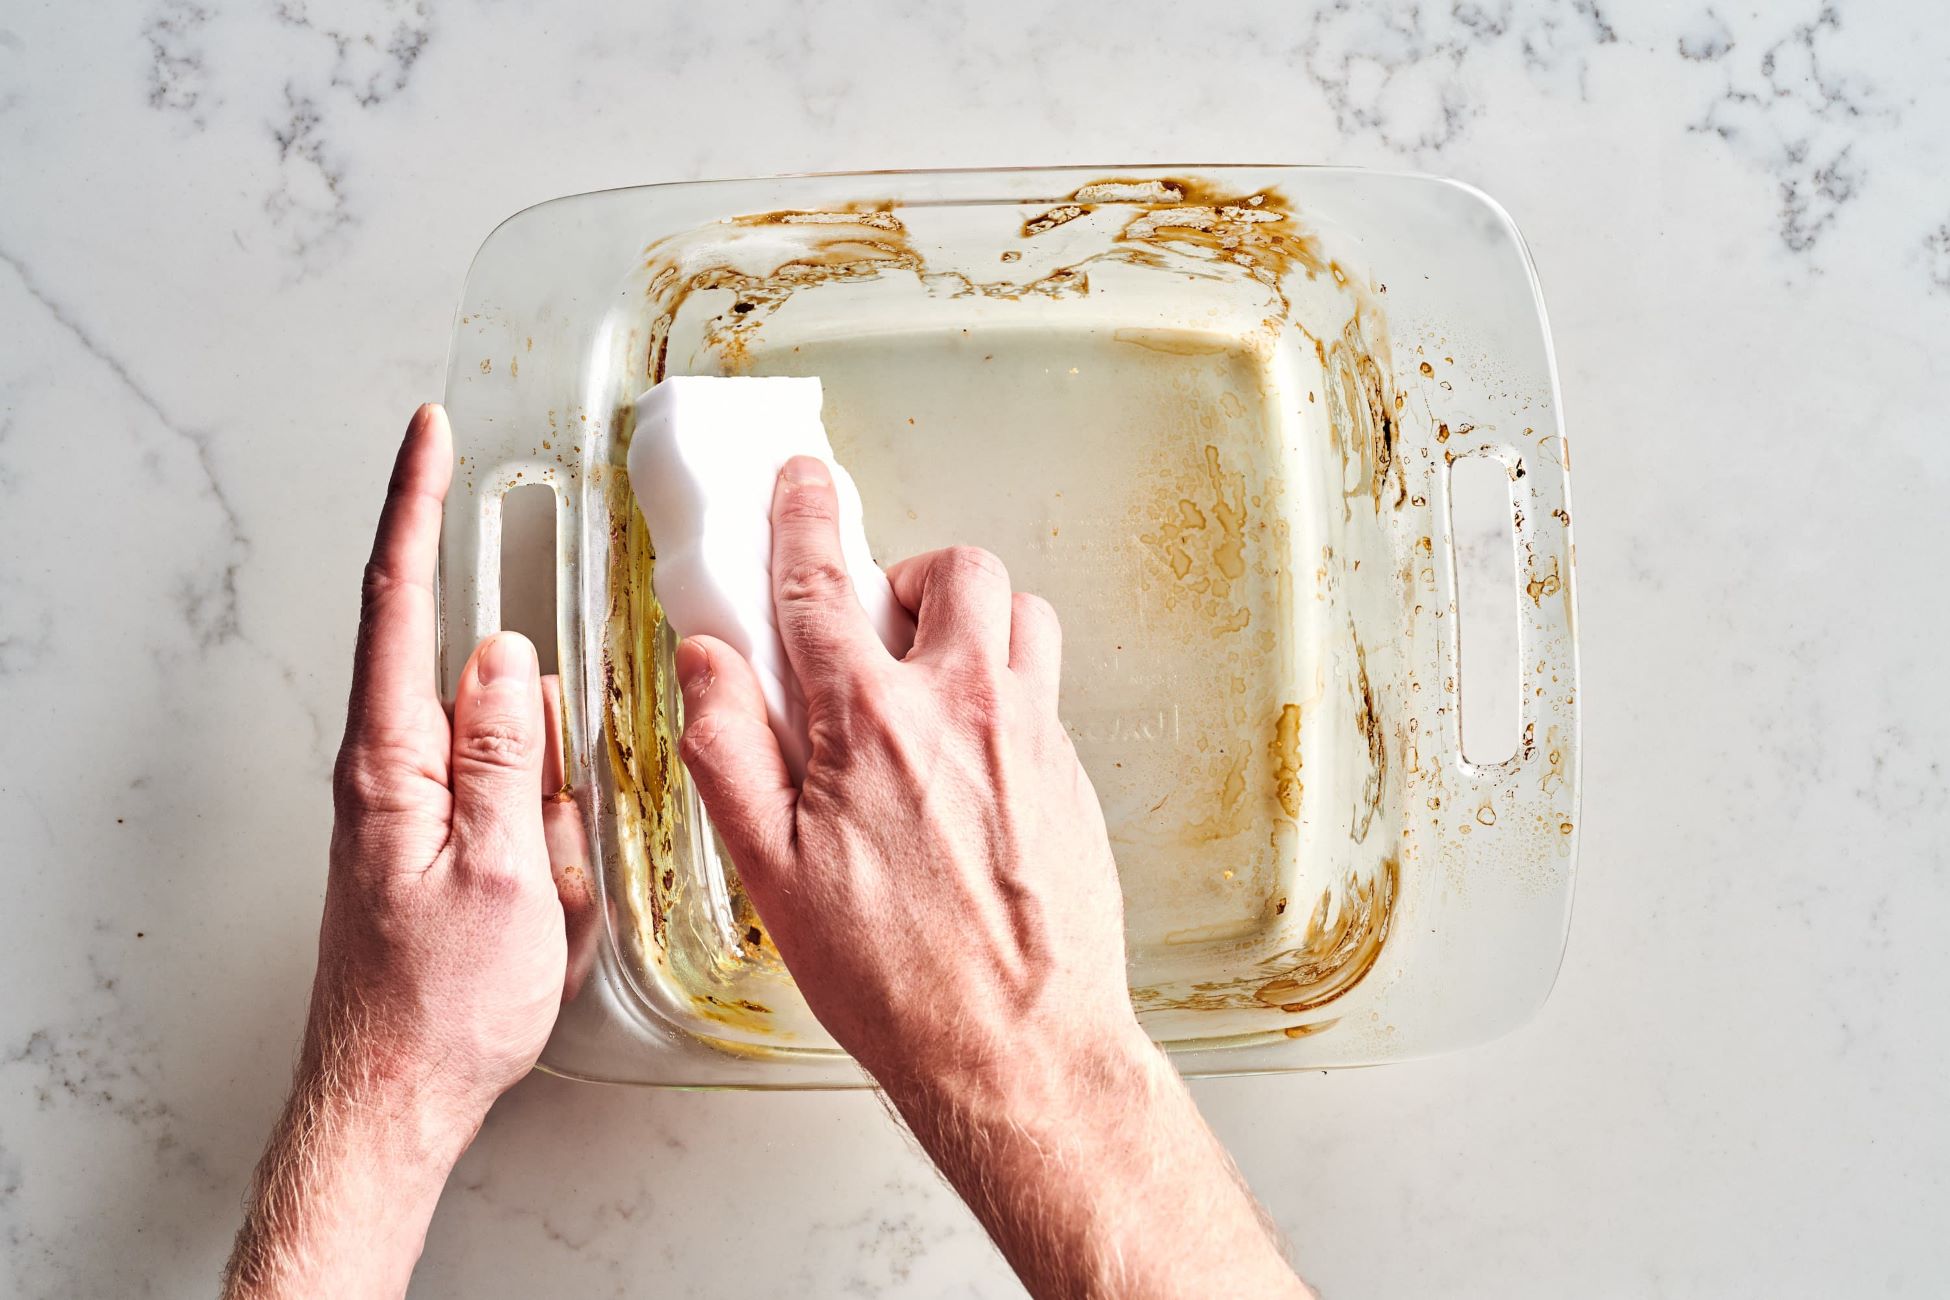 How To Clean Glass Baking Dish